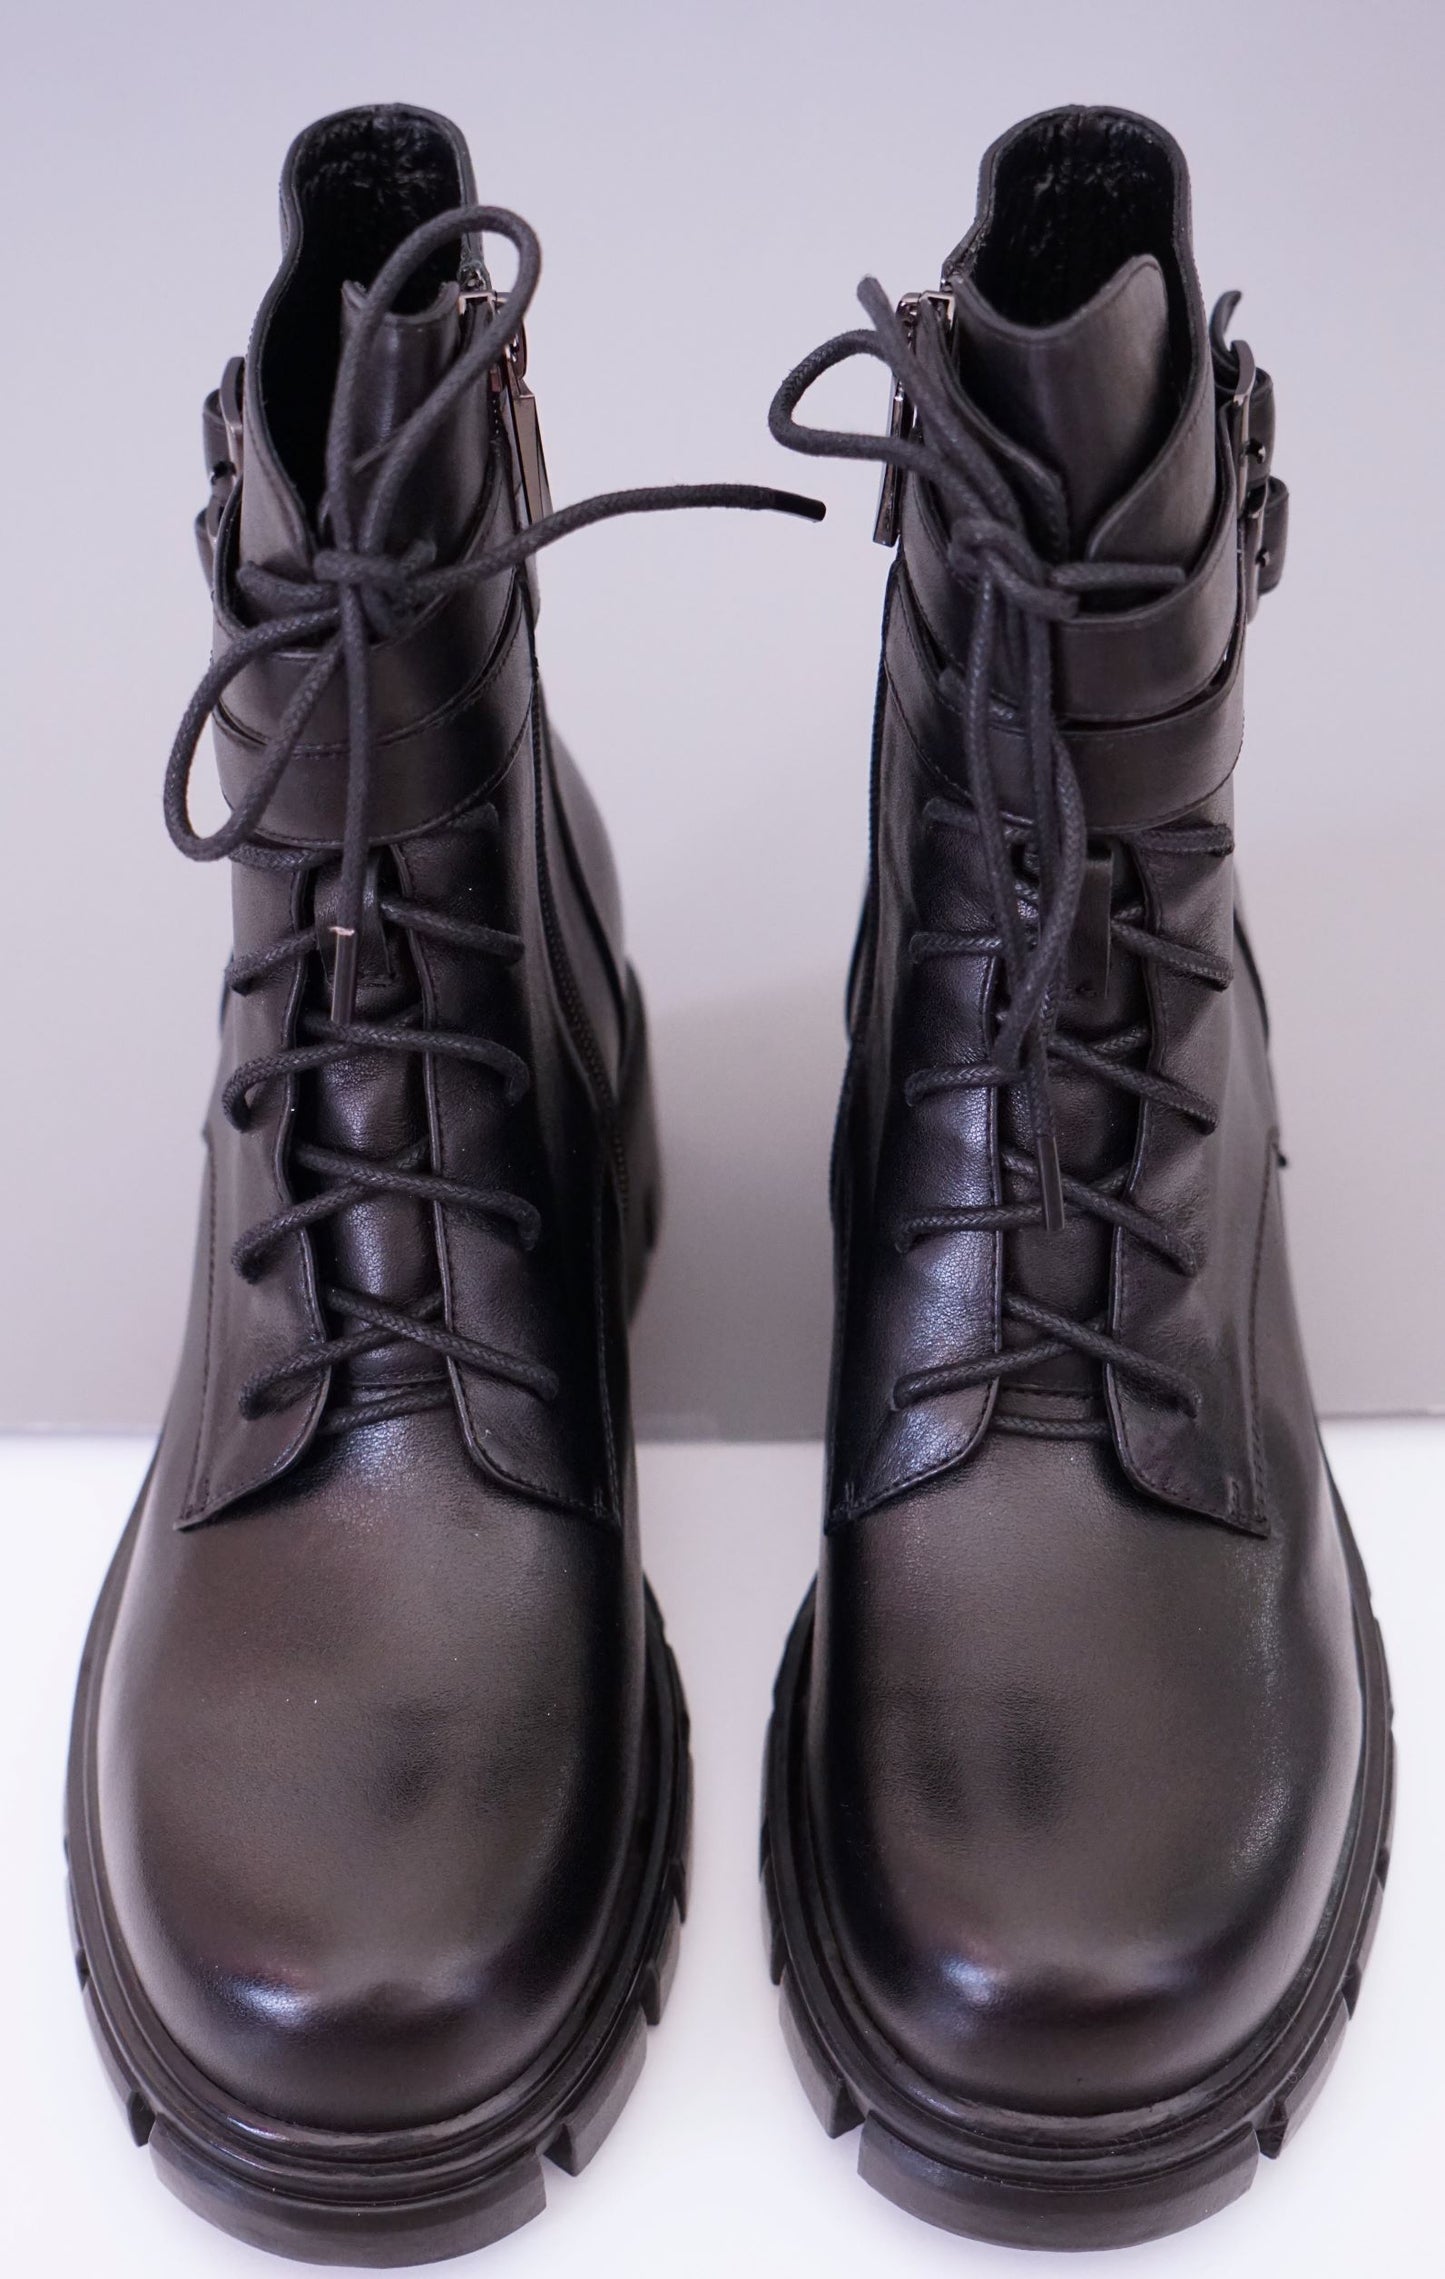 Smooth Genuine Leather Buckled Lace -up Combat Boots for Women - Eugenia Molina